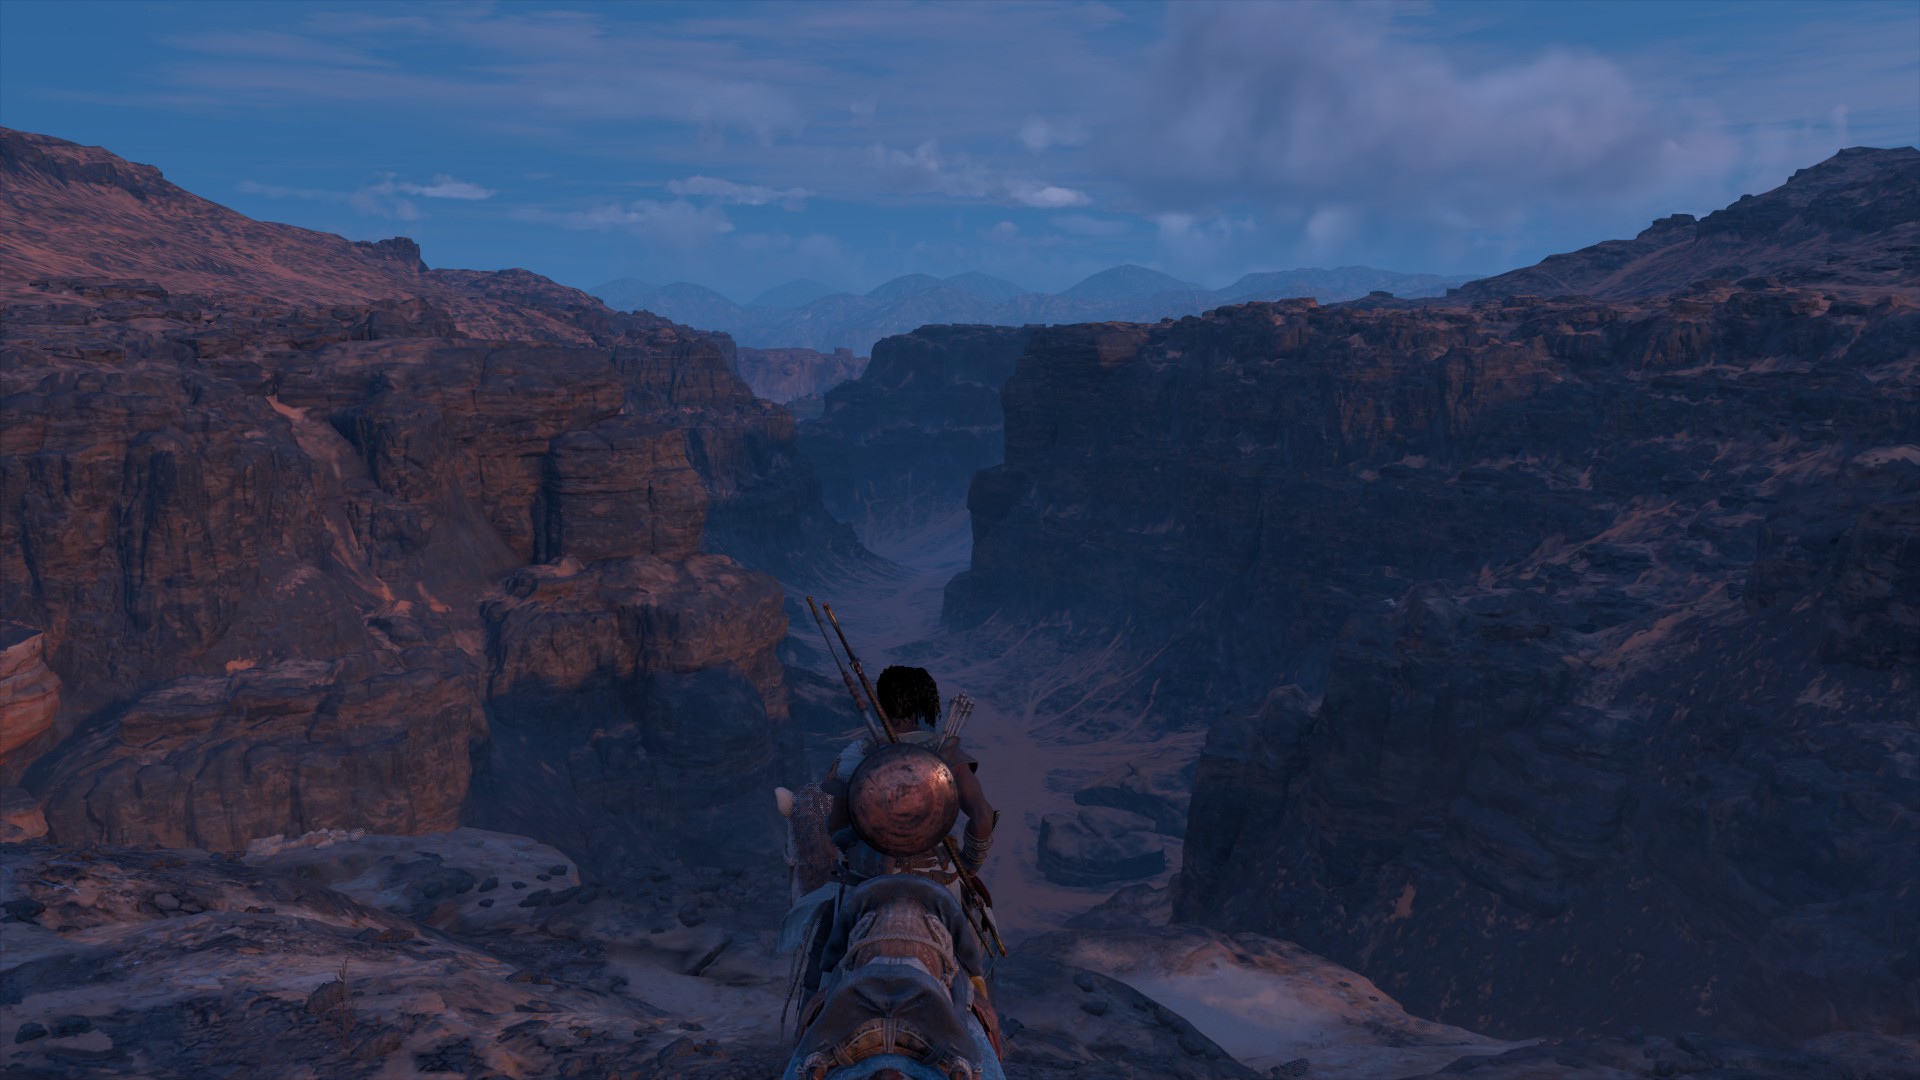 Landscape: a rider sits on a horse on a bluff above an absolutely arid canyon. The top is rocky but the canyon floor is covered in sand.